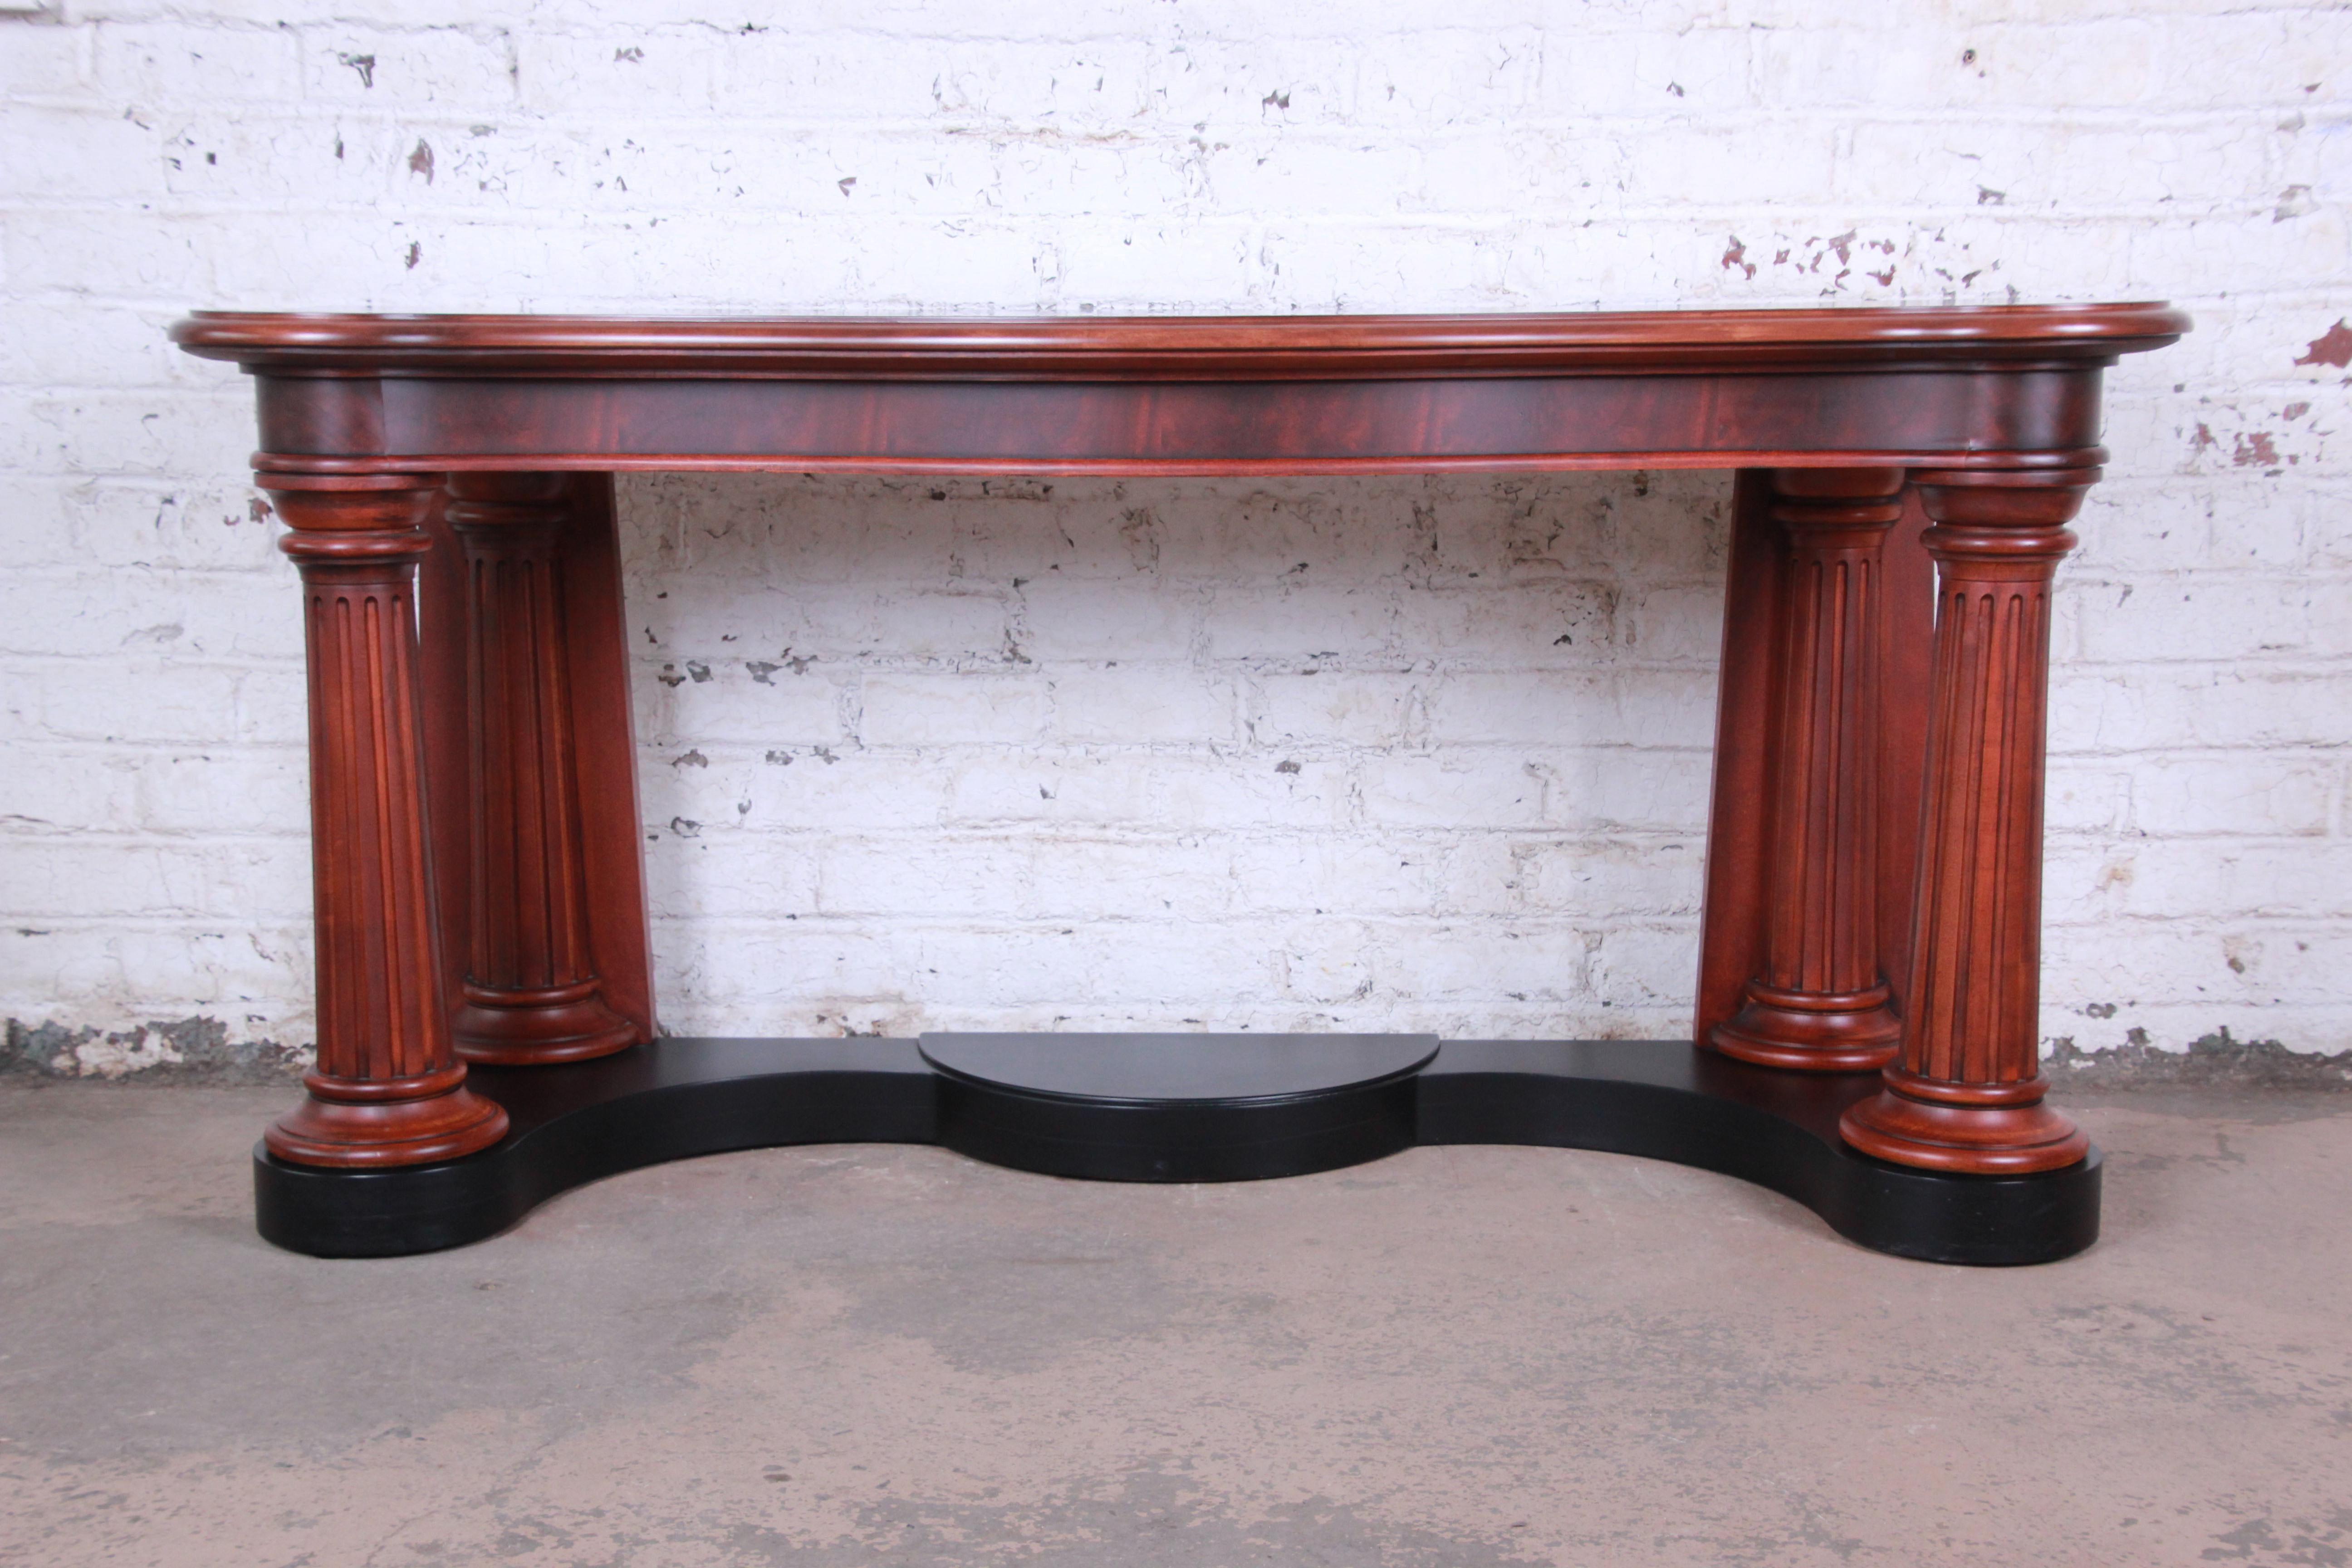 An outstanding neoclassical style console table designed by Ralph Lauren. The table features gorgeous flame mahogany wood grain and a nice Traditional Design. The curved top rests on tall columned legs, with a black lacquered base. The tabletop has